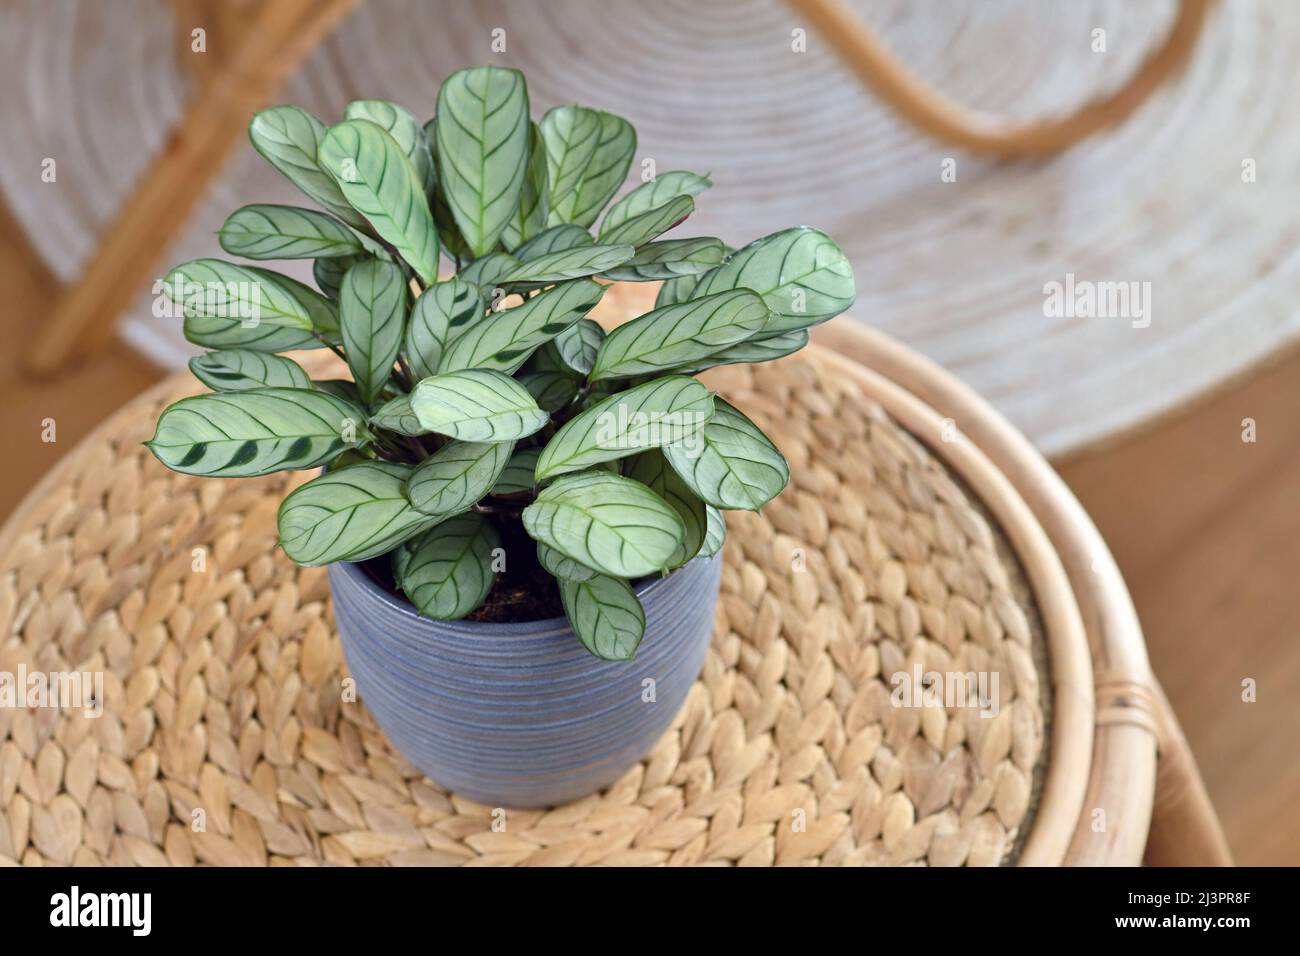 Tropical 'Ctenanthe Burle Marxii Amagris' houseplant with dark green vein stripe pattern in flower pot on table Stock Photo